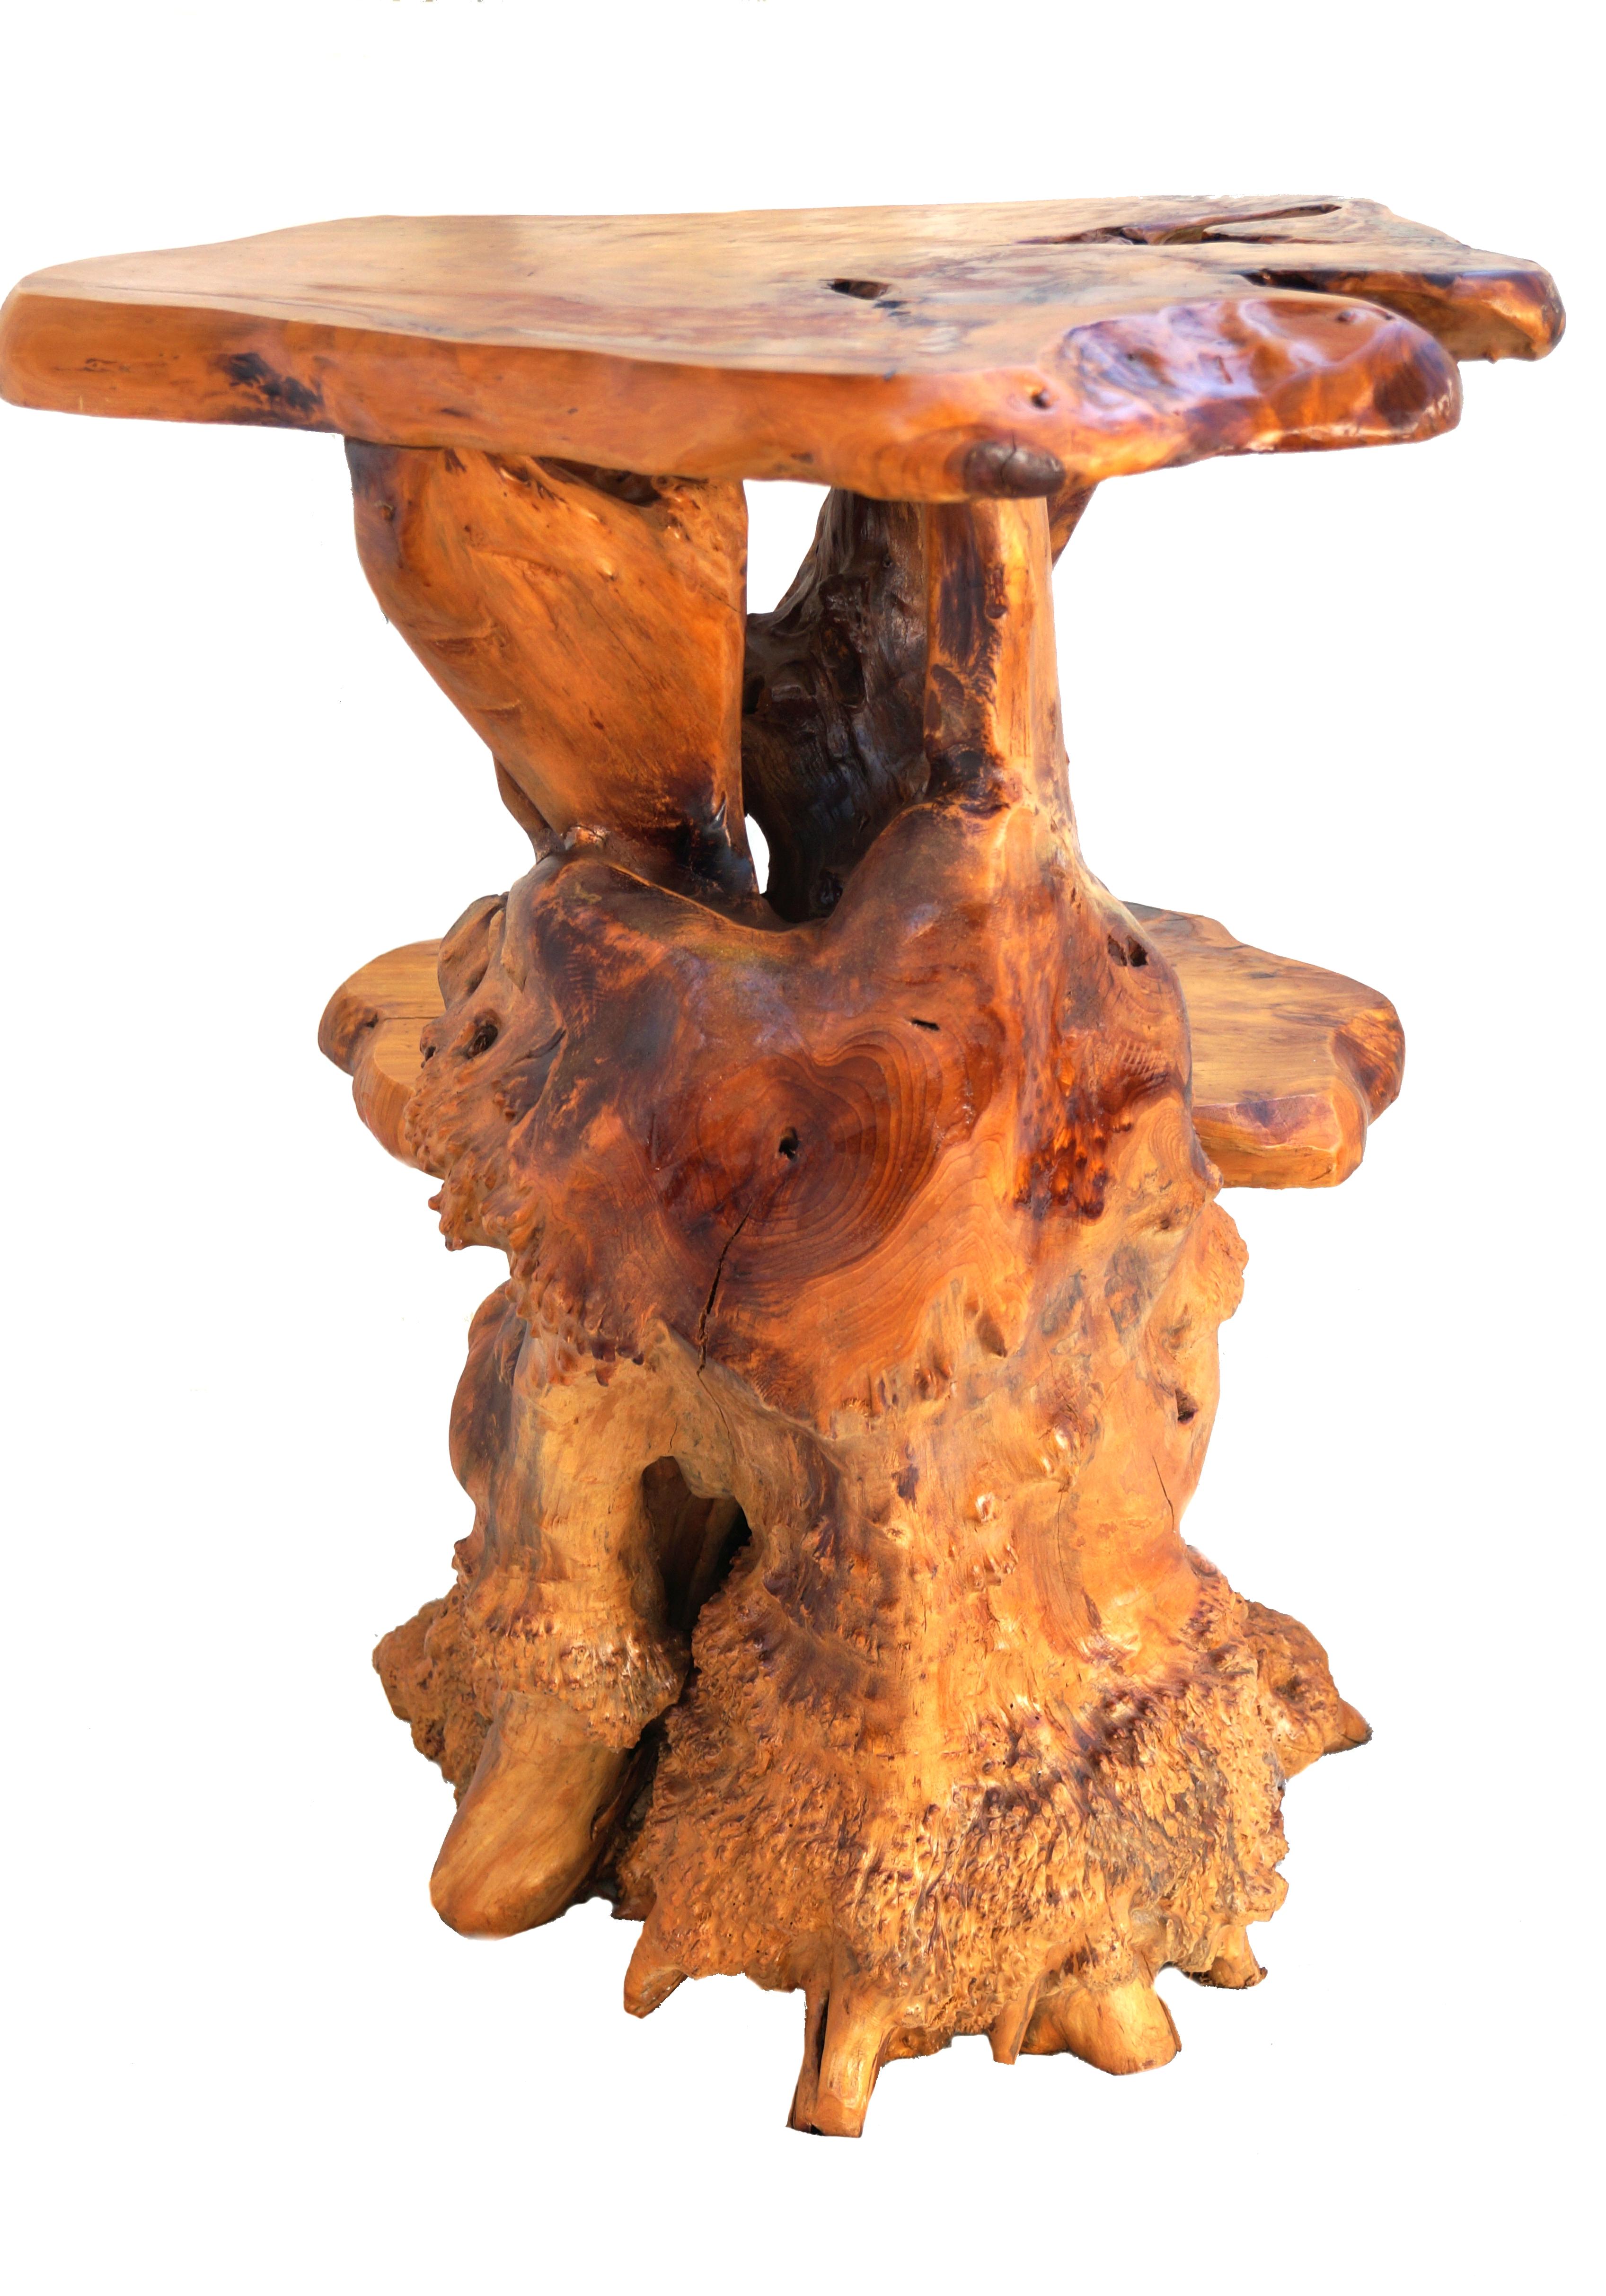 Freeform Sculptural Organic Natural Tree Root Wood Pedestal Plant Stand Table For Sale 4